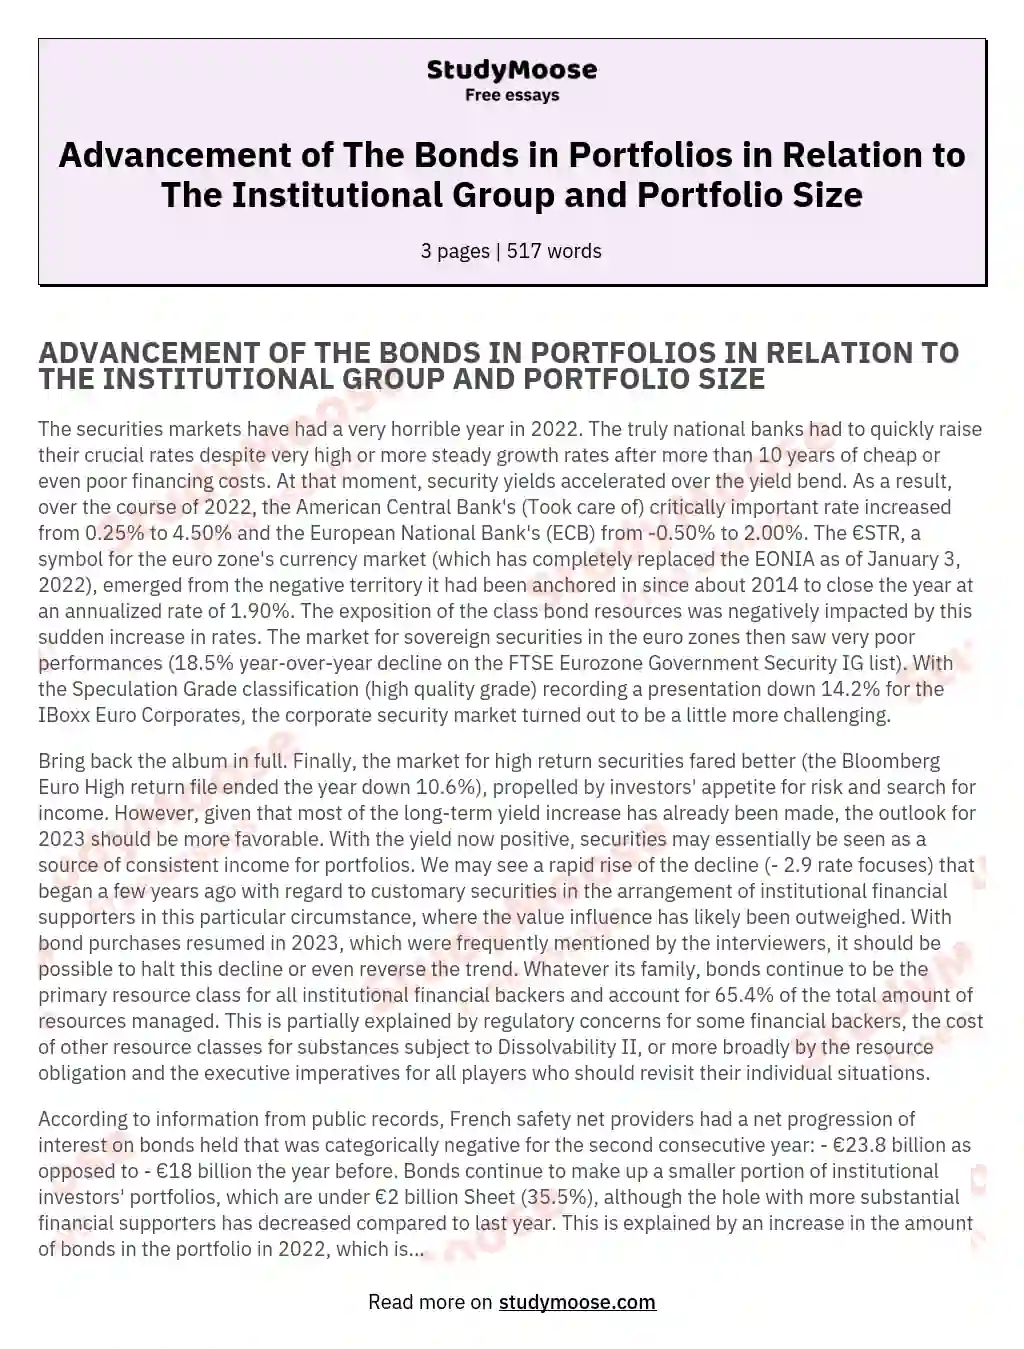 Advancement of The Bonds in Portfolios in Relation to The Institutional Group and Portfolio Size essay